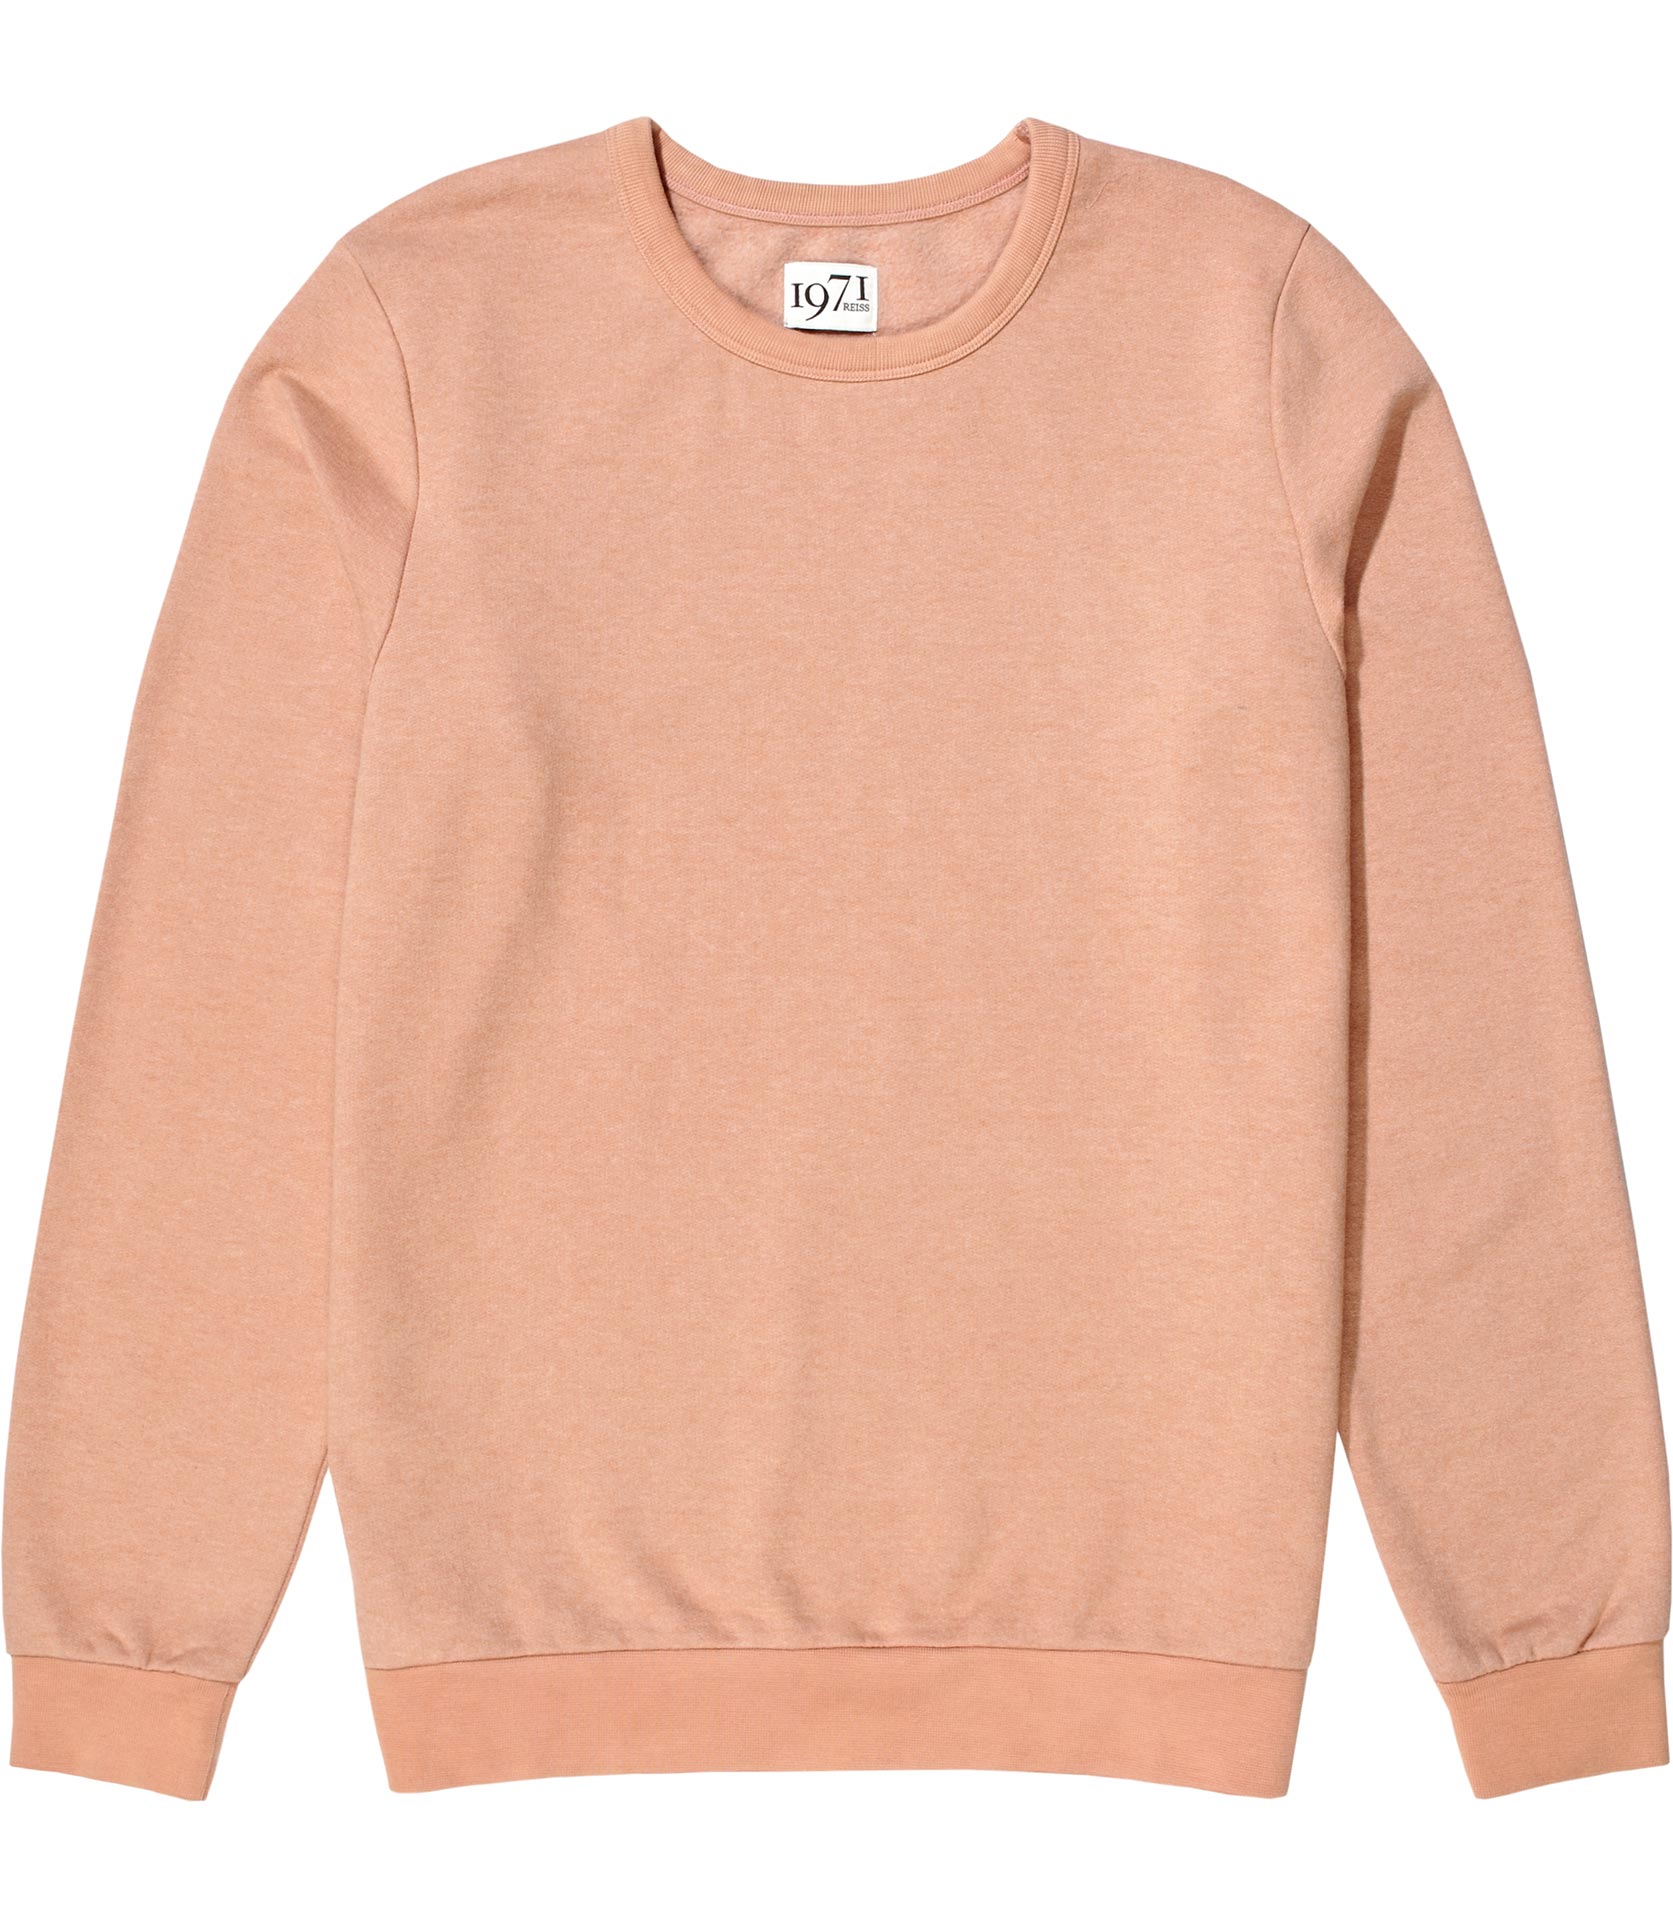 Reiss Trick Long Sleeve Washed Sweater in Peach (Orange) for Men - Lyst